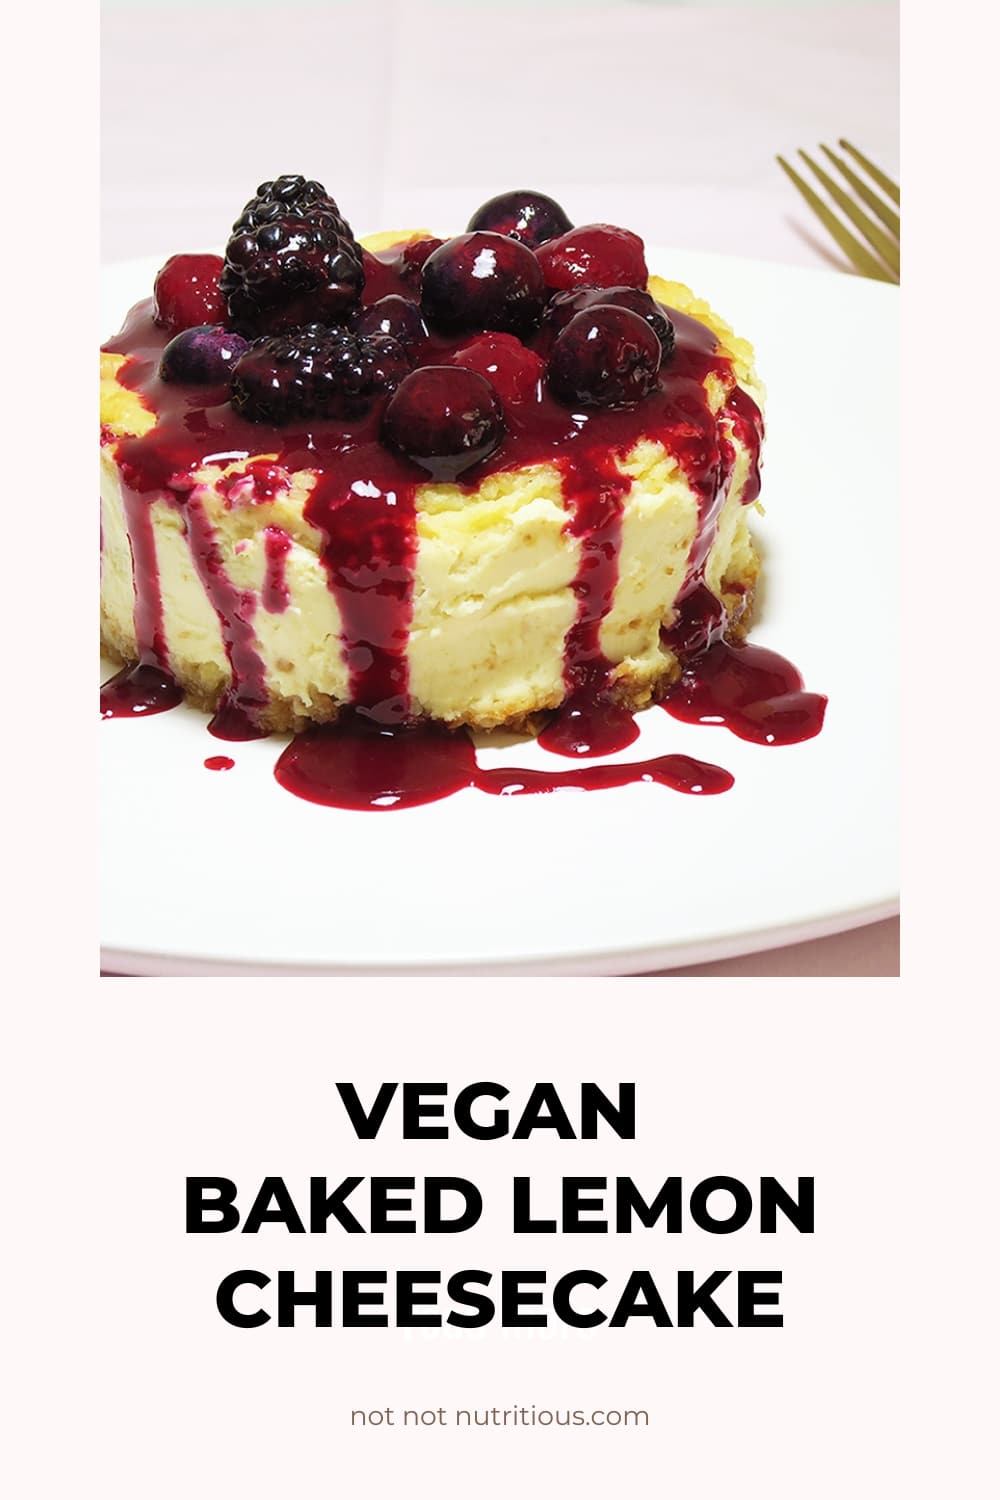 Pinterest Pin for Vegan Baked Lemon Cheesecake, with cheesecake topped with Triple Berry Sauce on a white plate